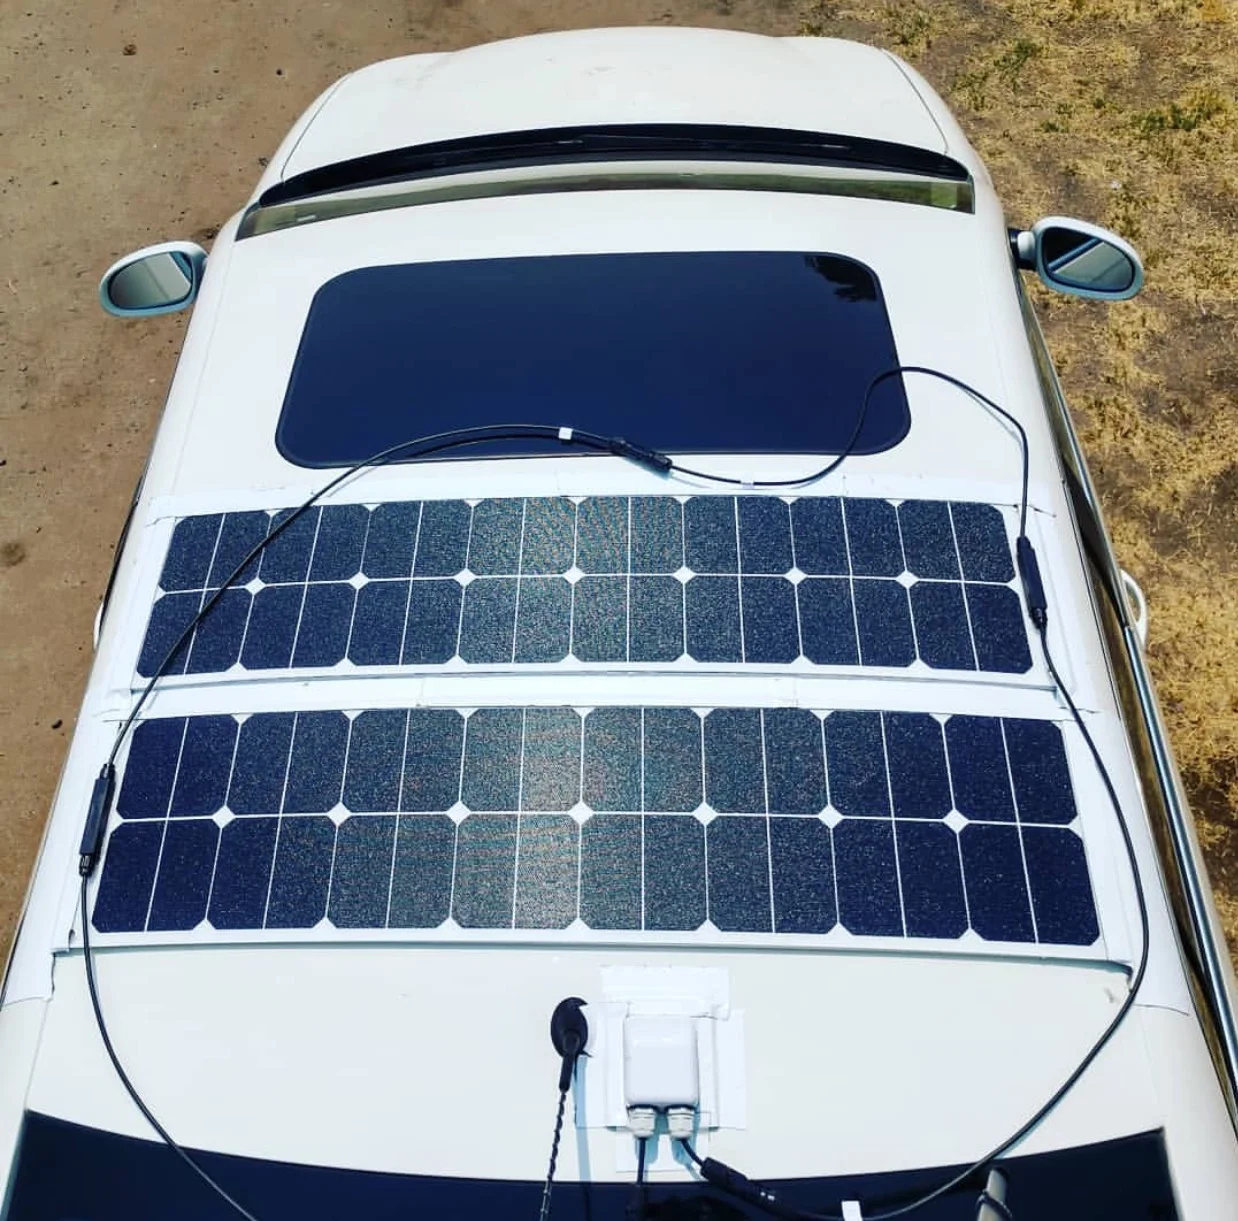 Factory cheap price sailboats flexible solar panels marine use for sale 200w